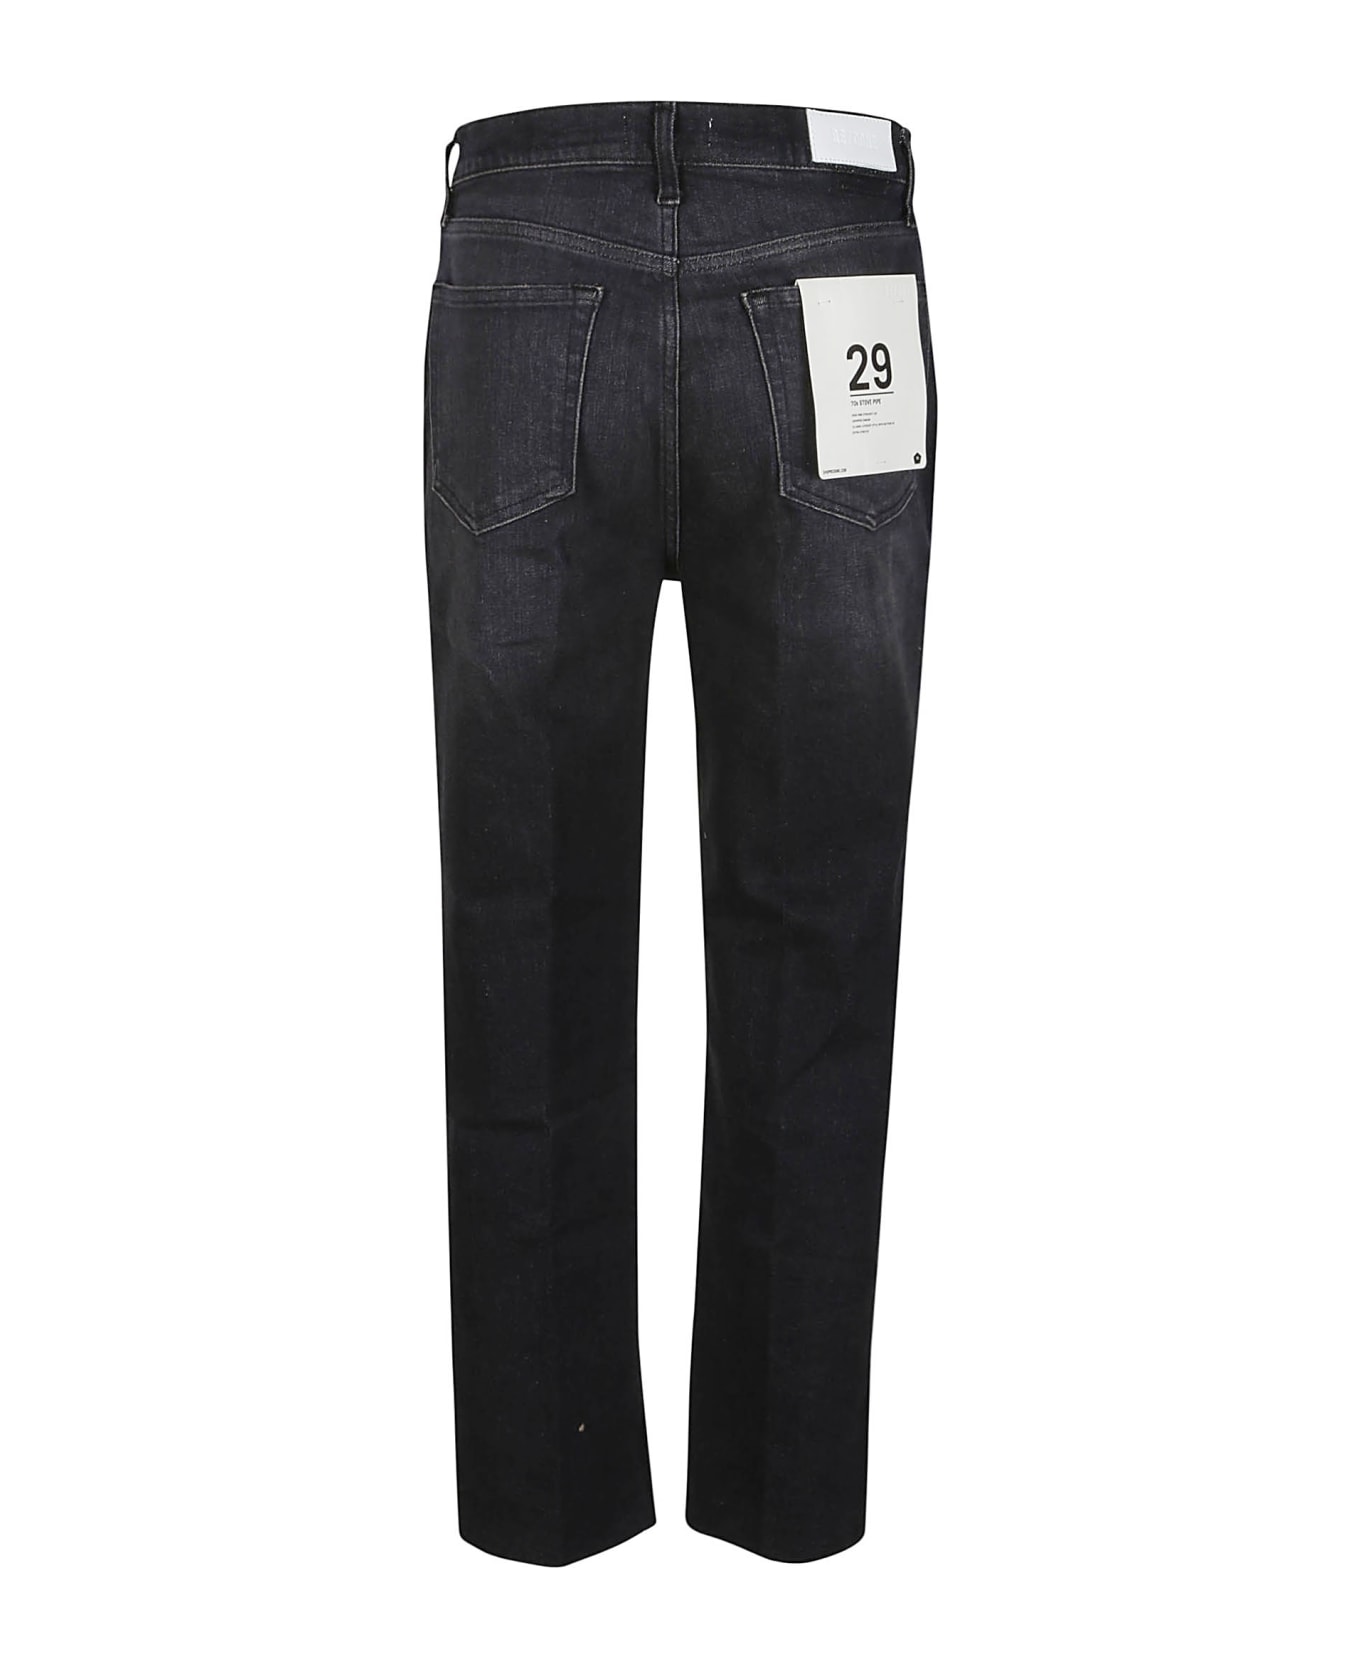 RE/DONE 70s Stove Pipe Jeans - Onyx Fade